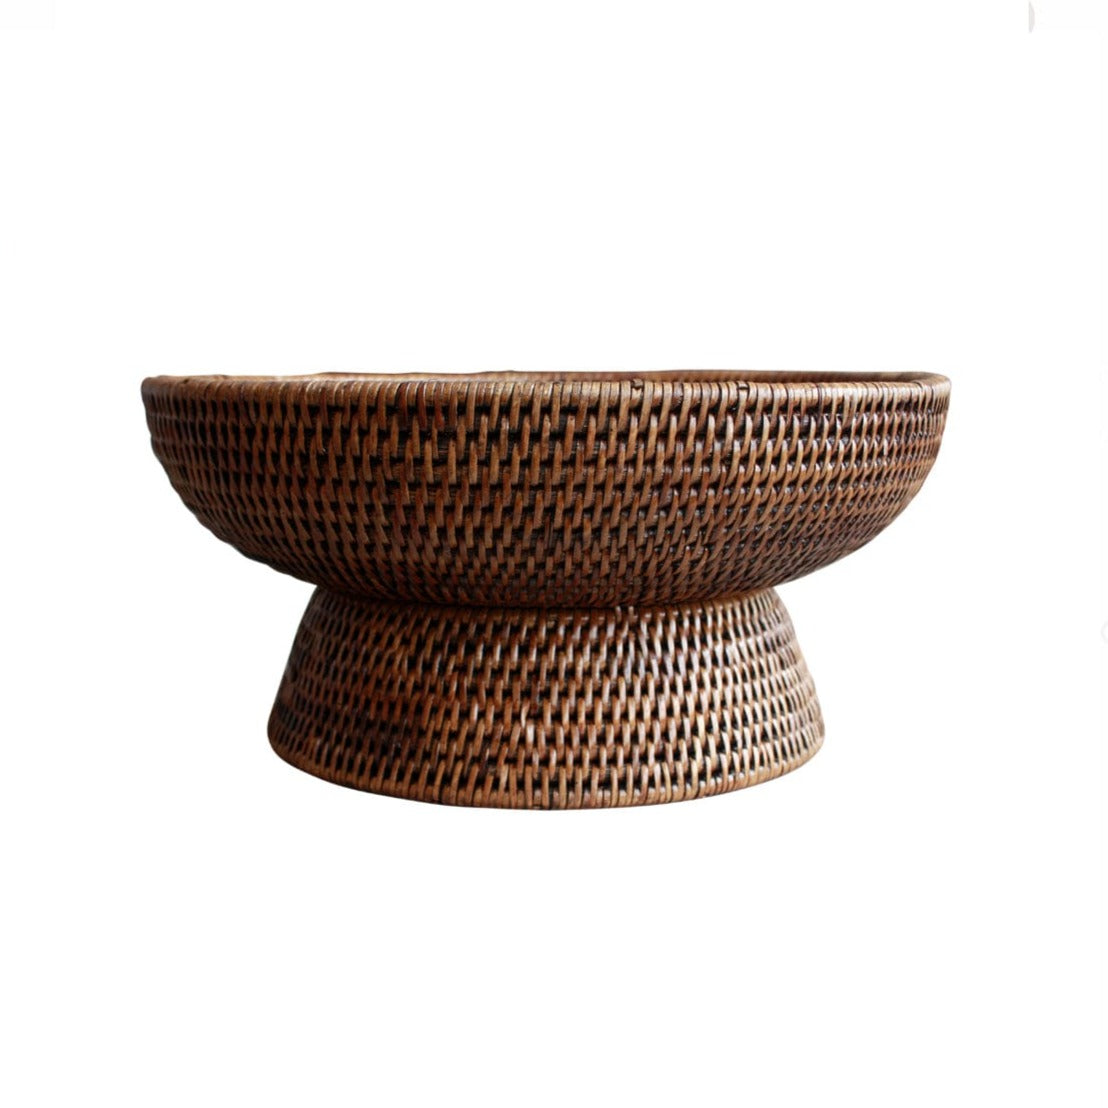 A side view of a brown rattan fruit bowl.